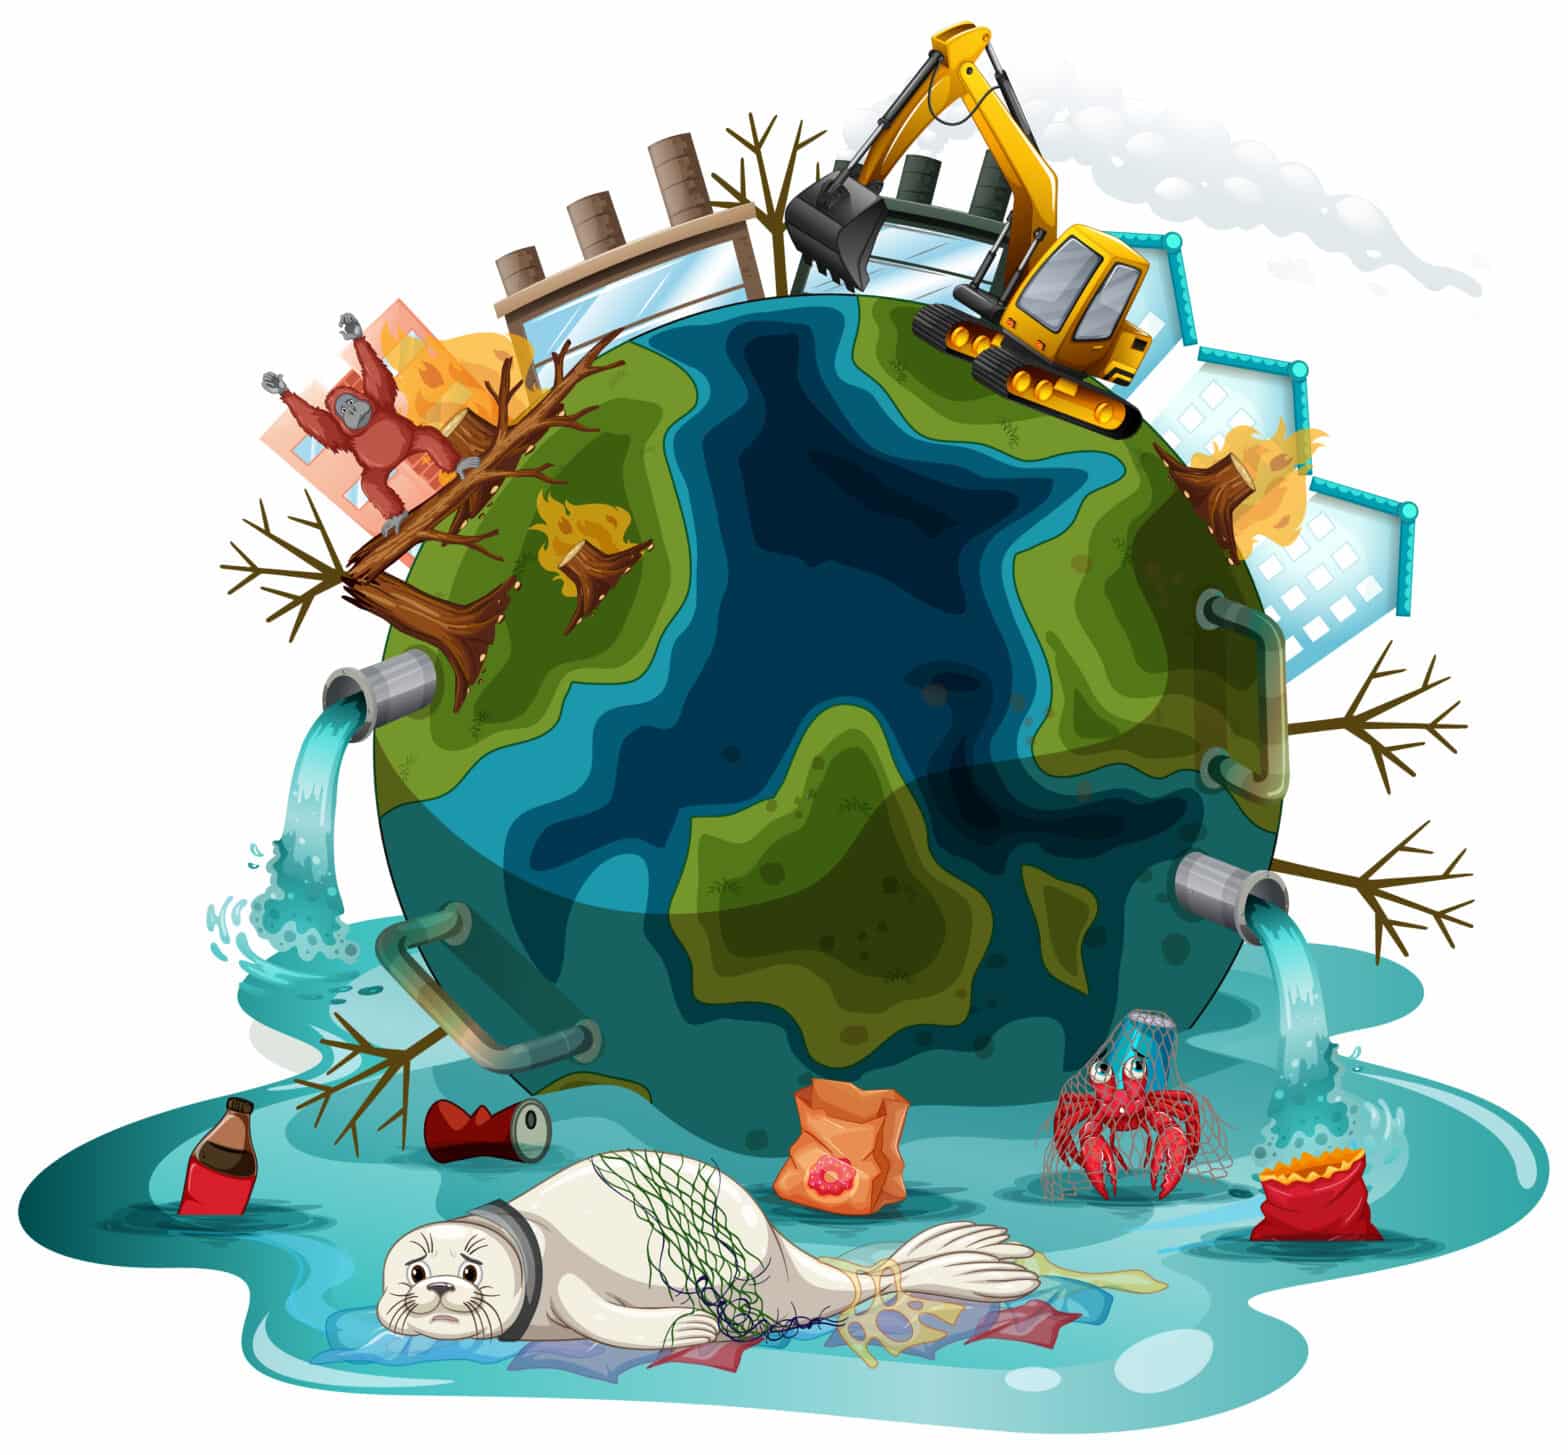 Poster design with pollutions on earth illustration